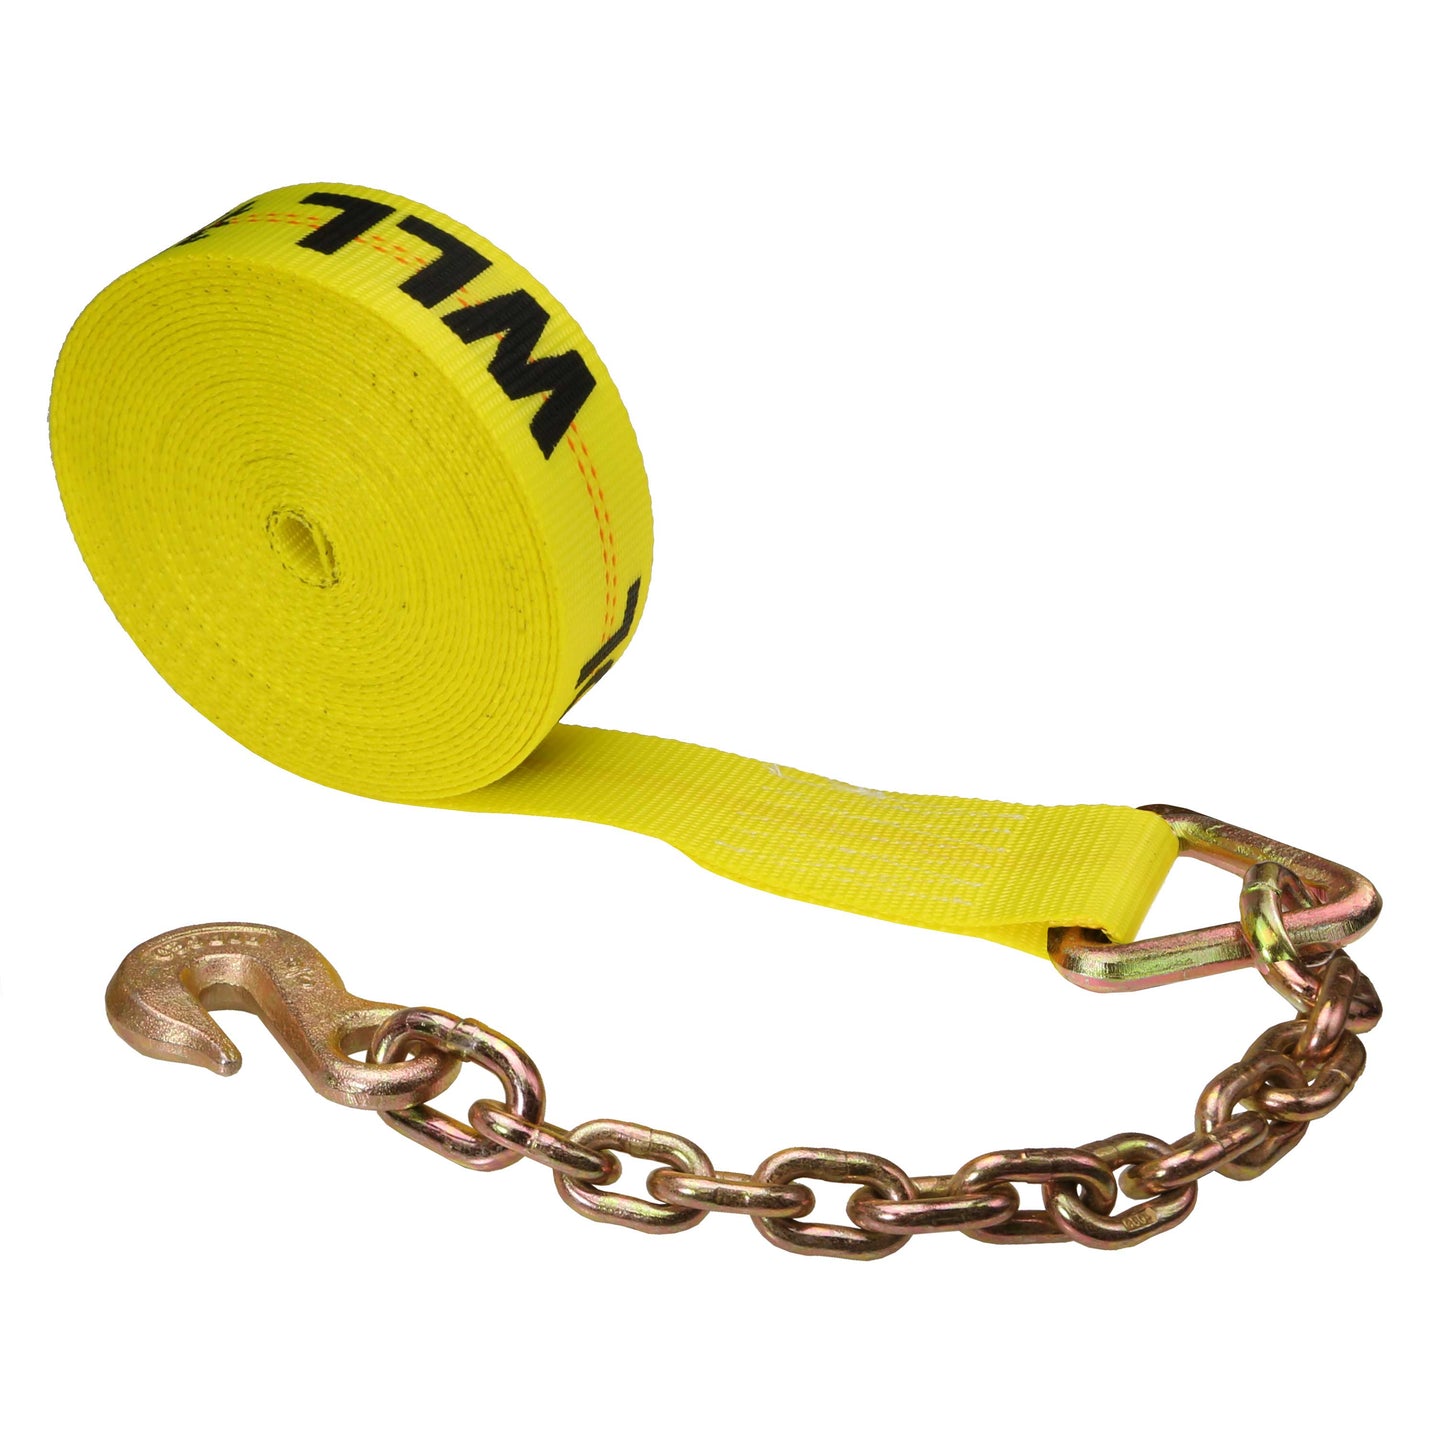 2 inch x 20 foot Winch Strap with Chain Extension